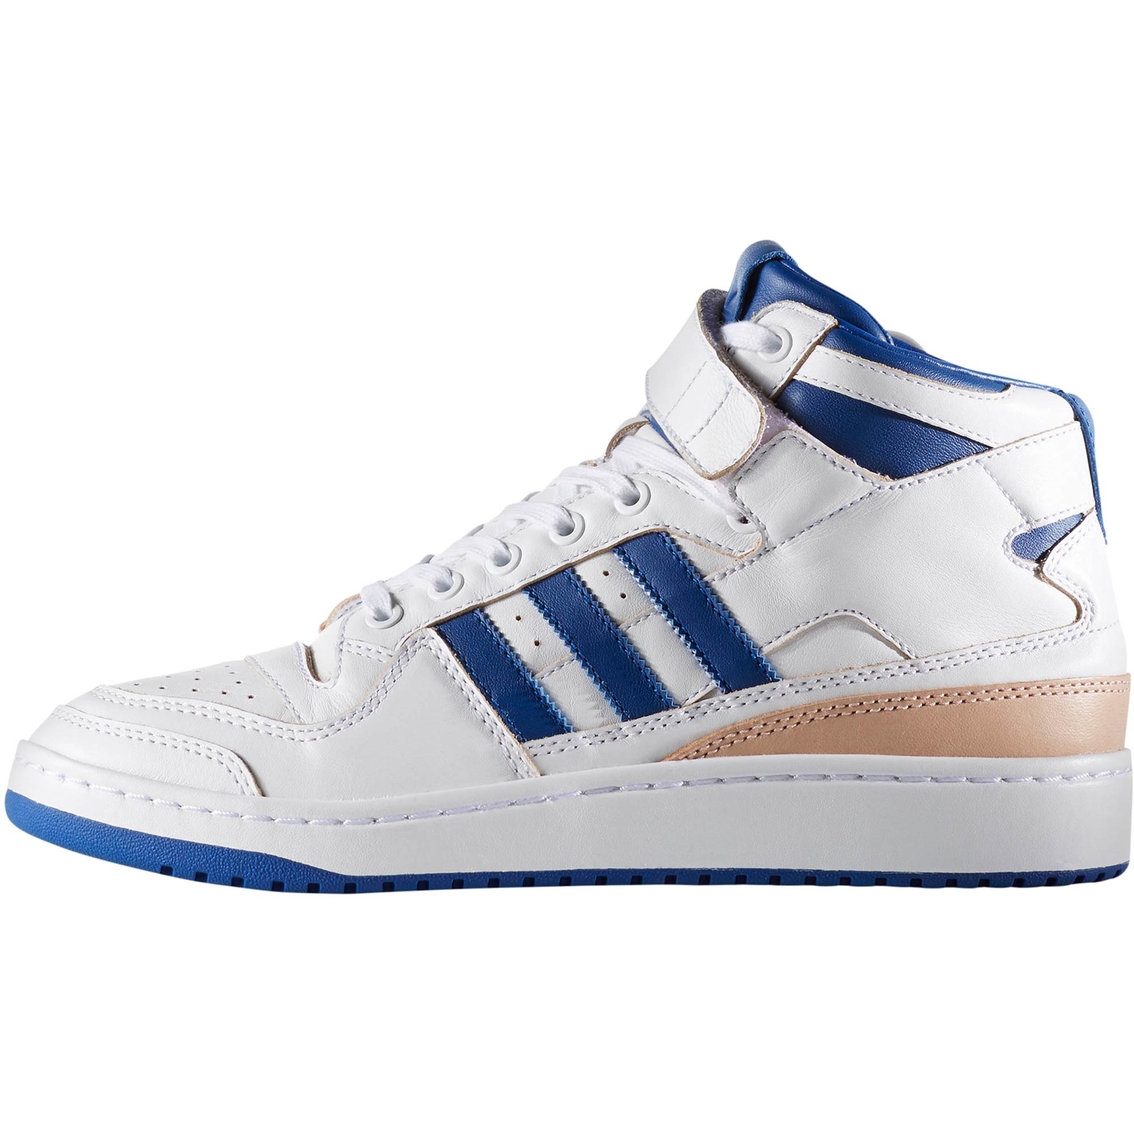 Adidas Forum Mid Refined Shoes, White | Sneakers | Shoes | Shop The ...